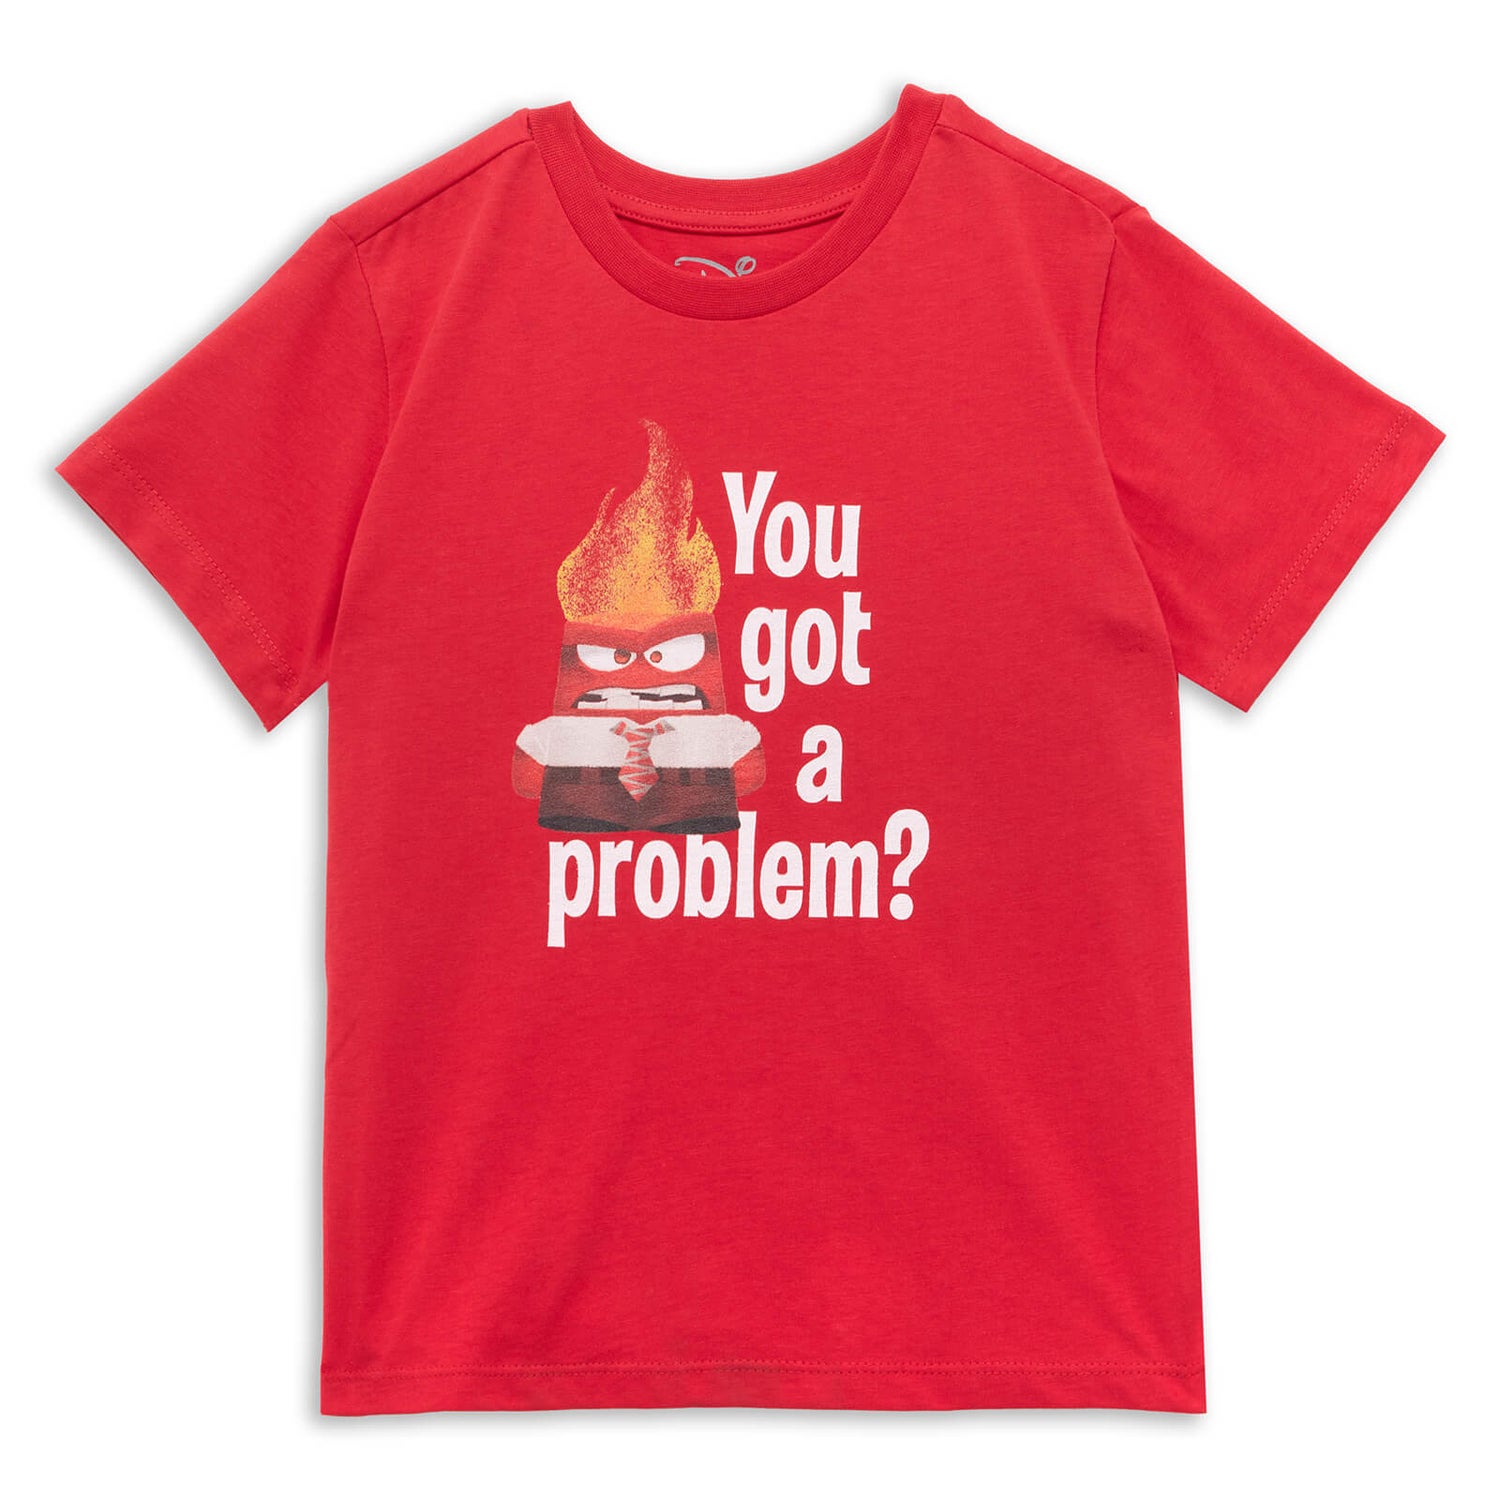 Inside Out Kids' T-Shirt - Red